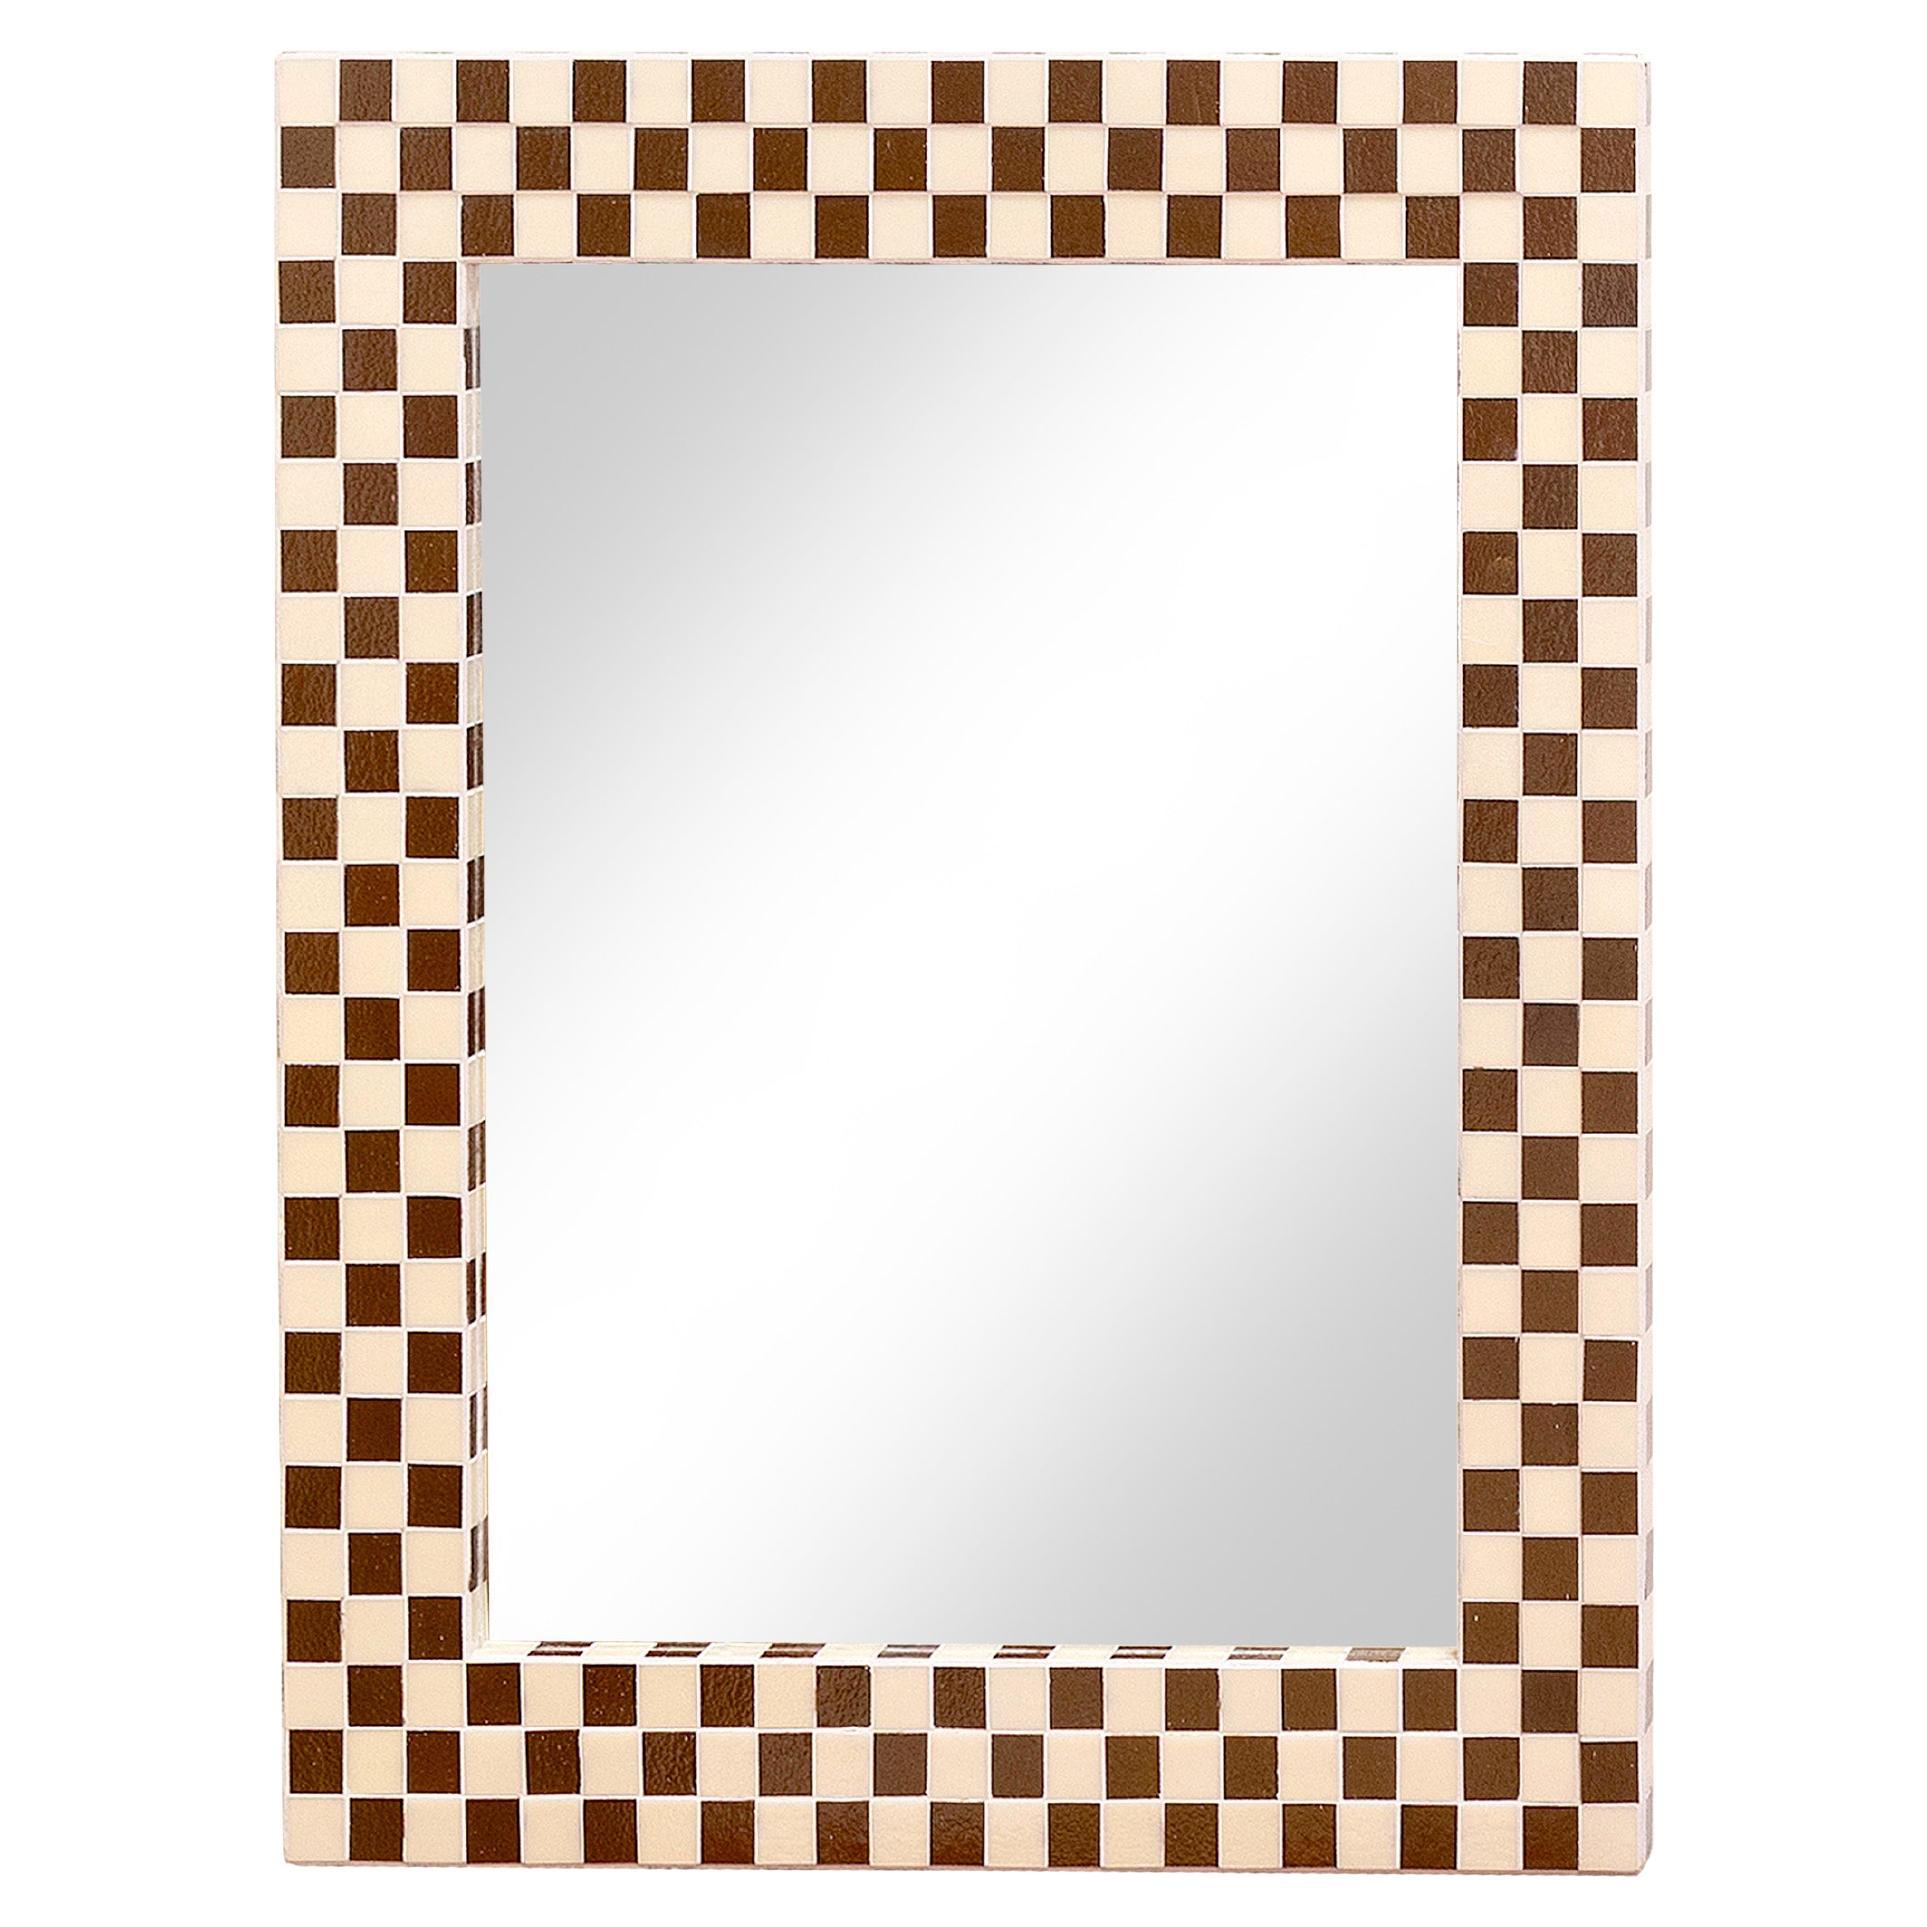 Modern Checkered Mosaic Square Mirror with Brown and Ivory Glass by Ercole Home